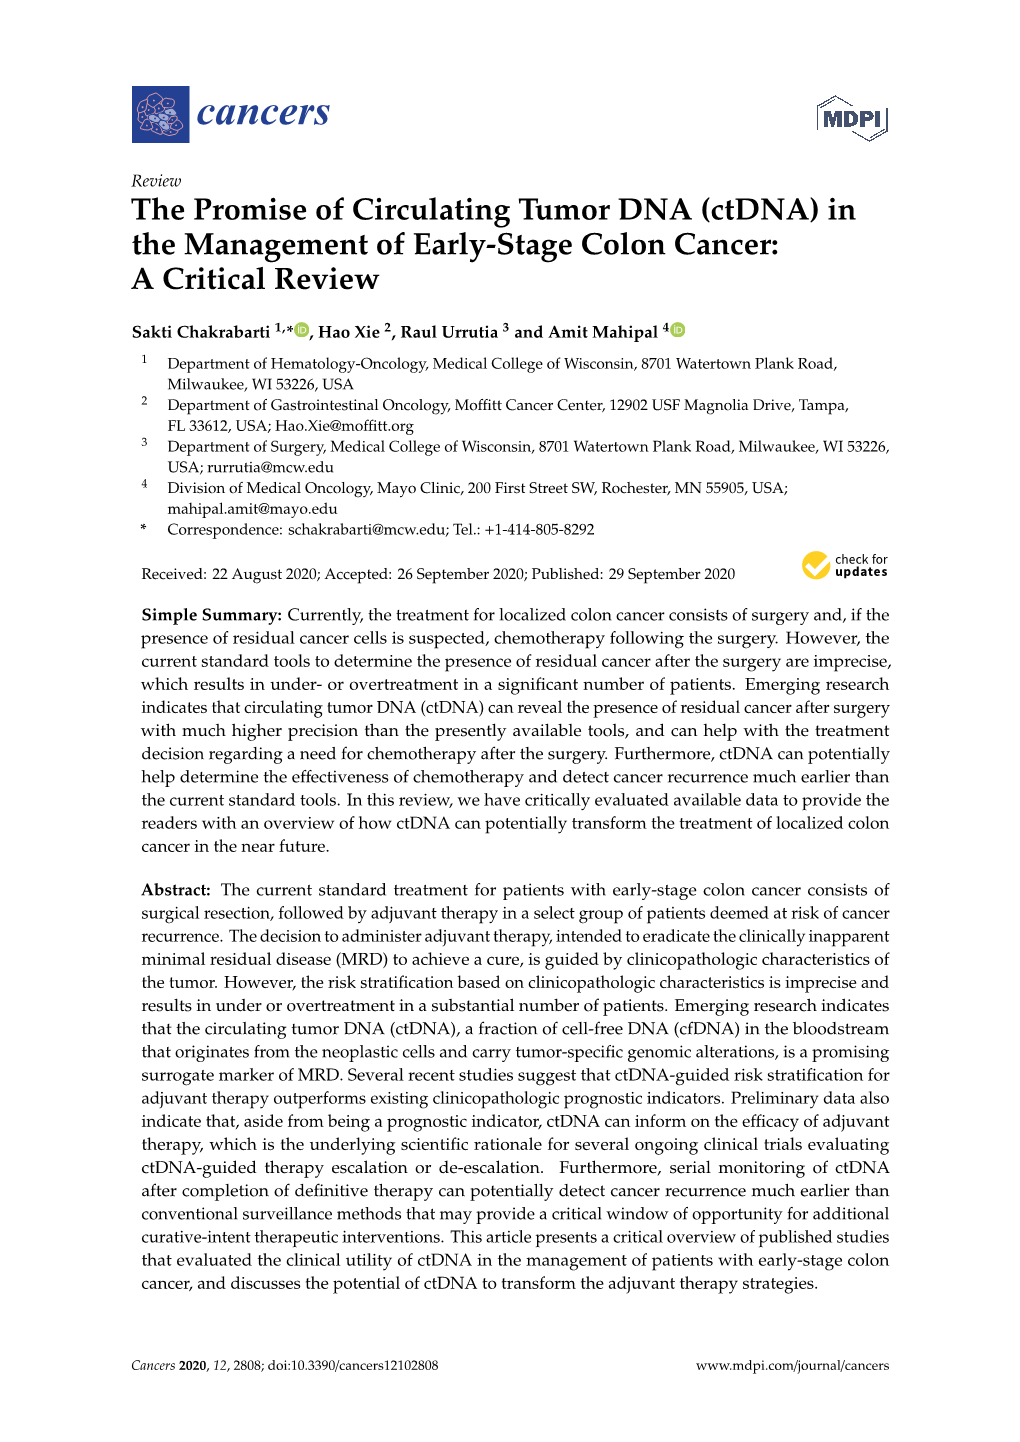 (Ctdna) in the Management of Early-Stage Colon Cancer: a Critical Review